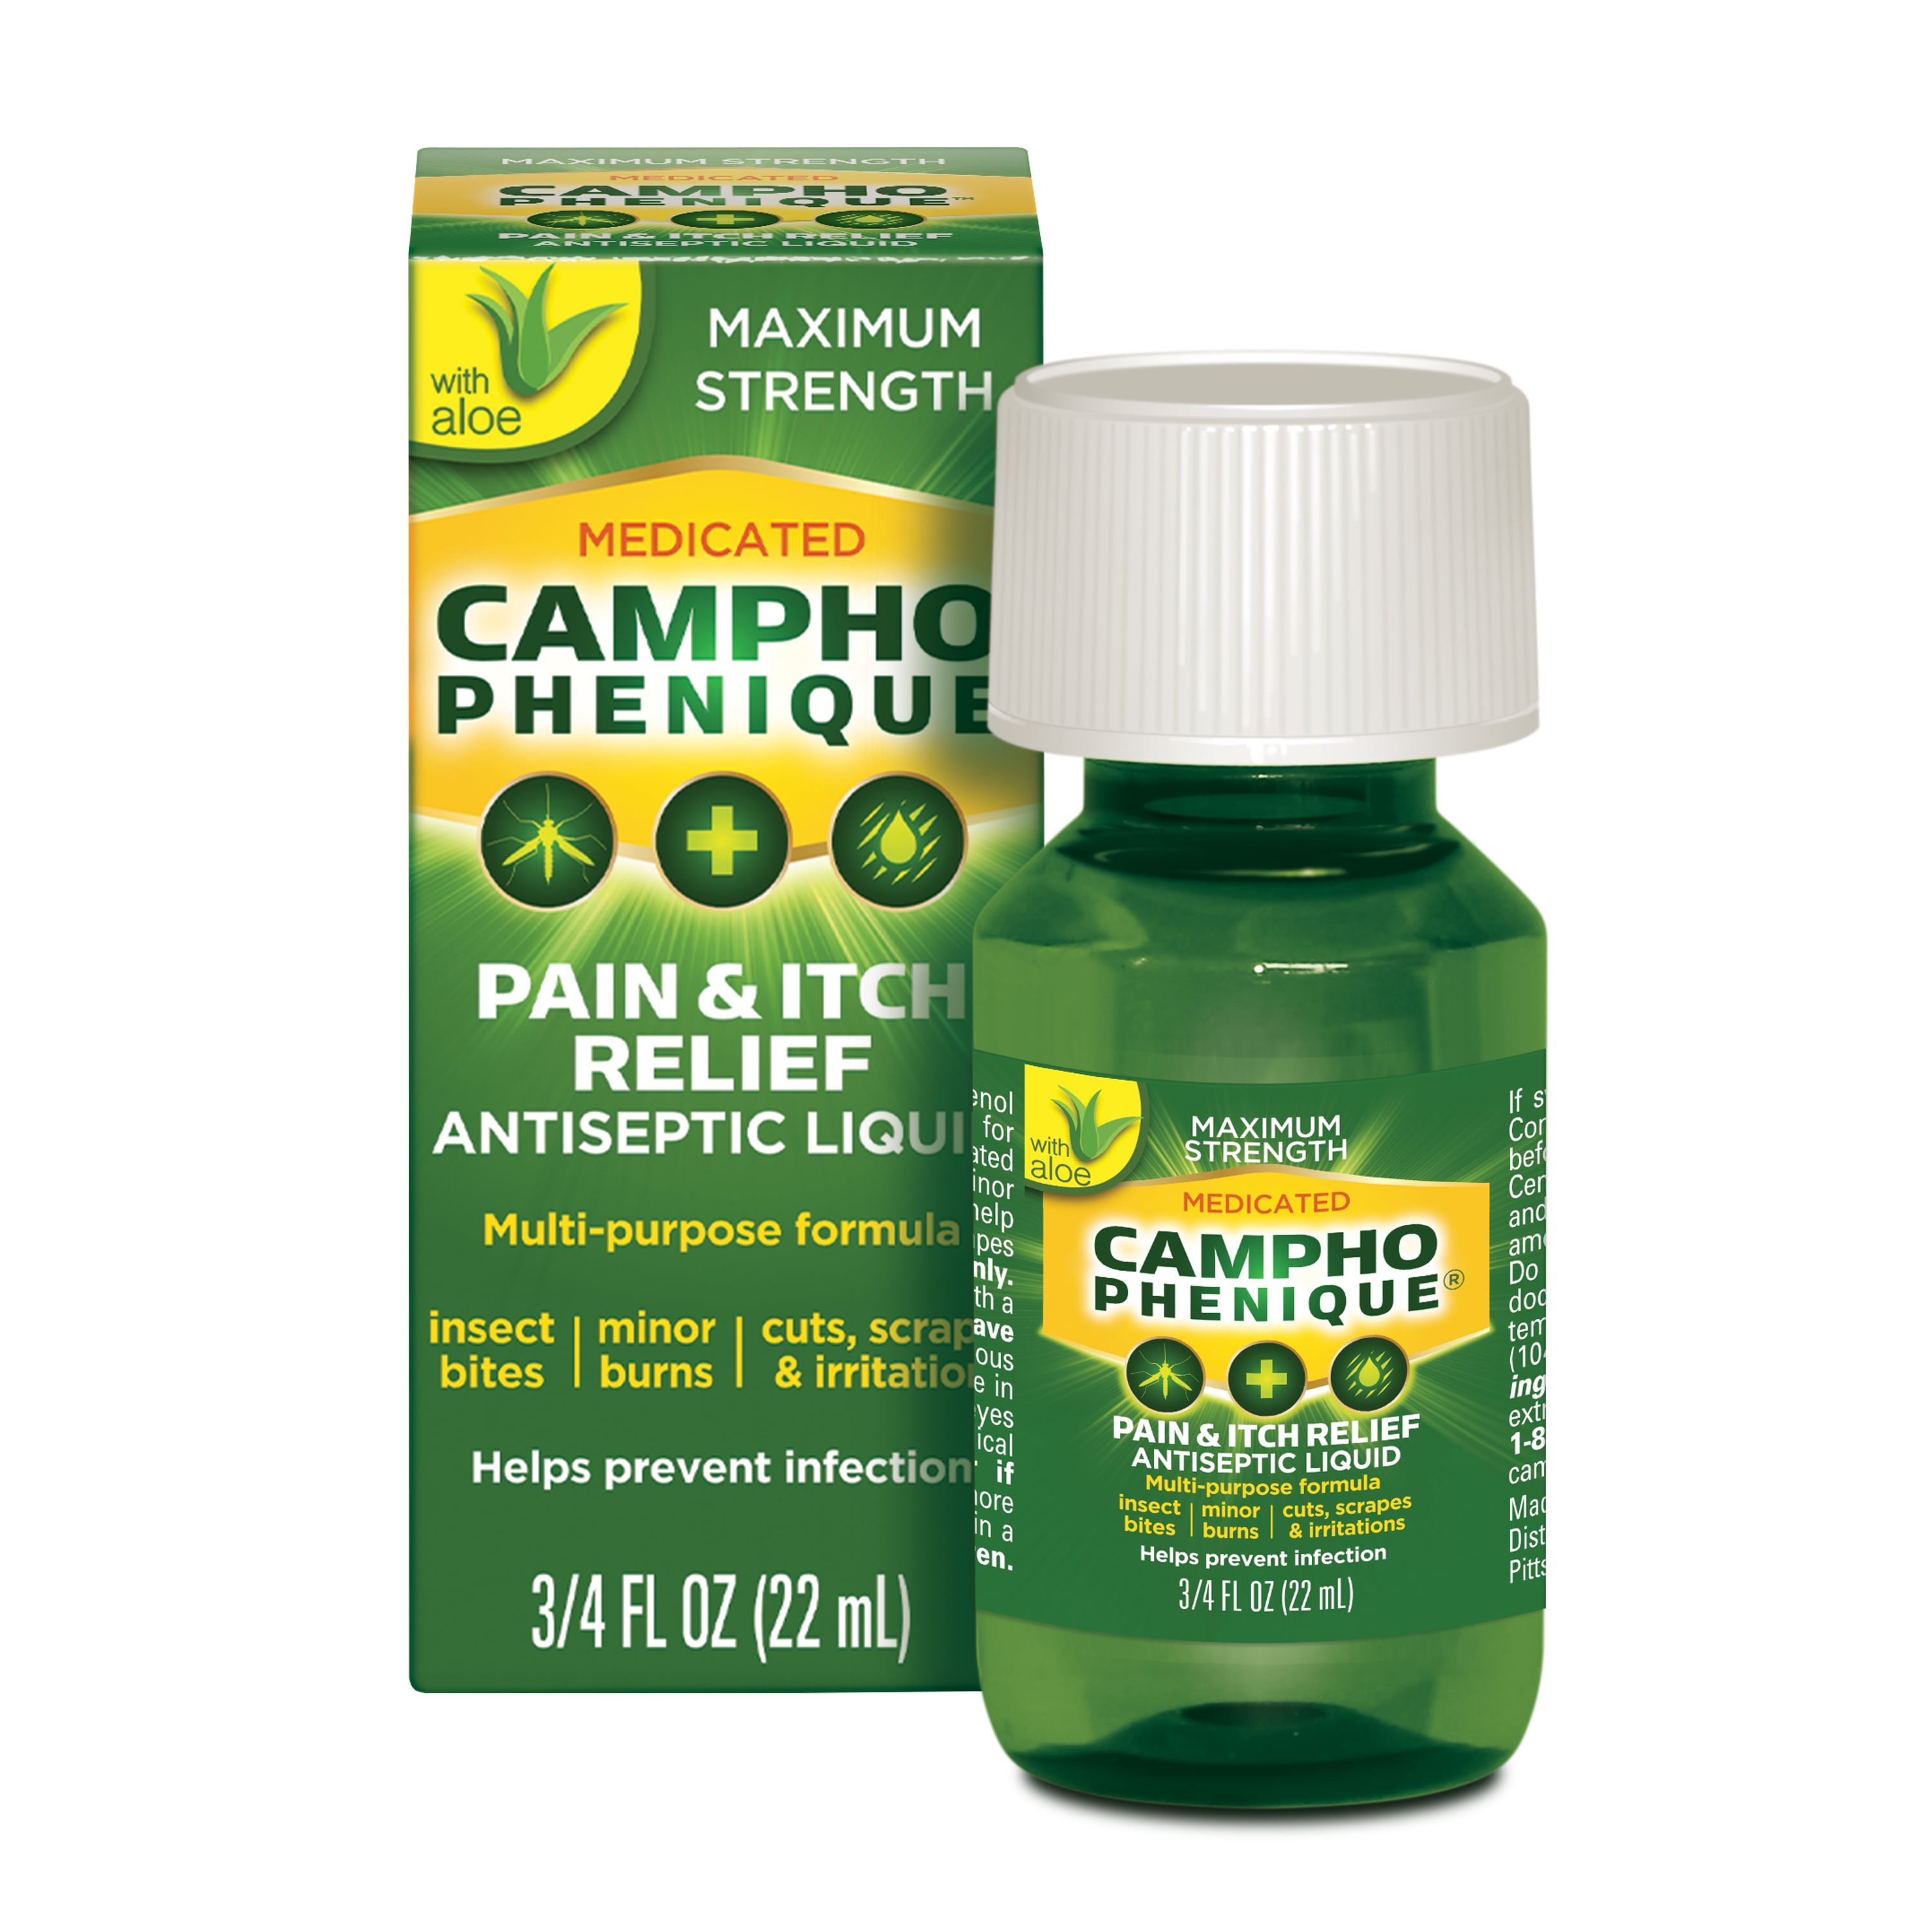 Campho Phenique Maximum Strength Antiseptic Liquid, Pain Relief and Anti-Itch Treatment, Provides Instant Relief Bug Bites, Minor Cuts and Skin Irritations, 0.75 Oz